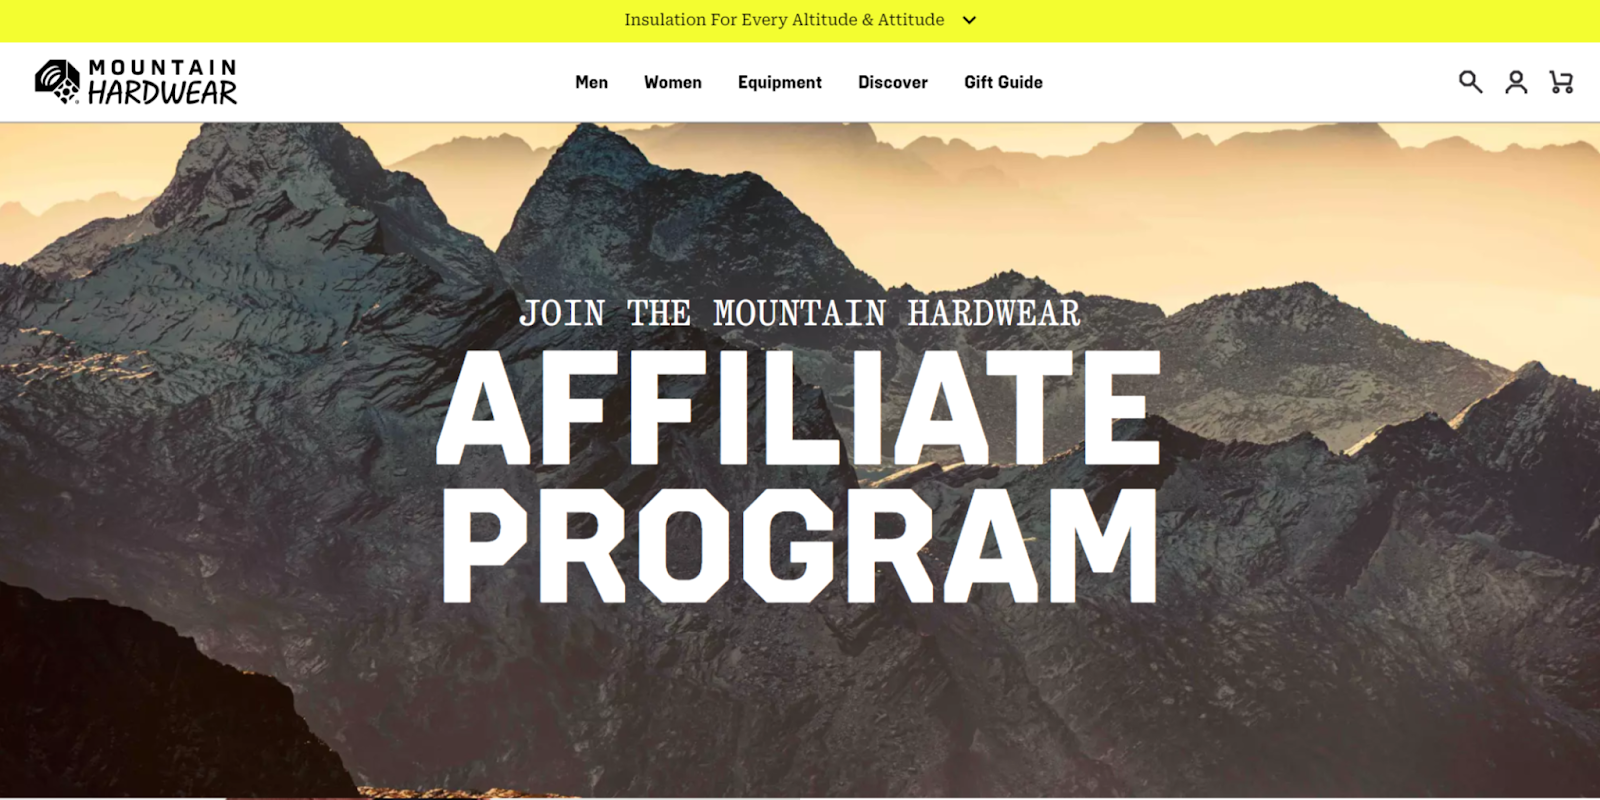 Mountain hardware affiliate program home page